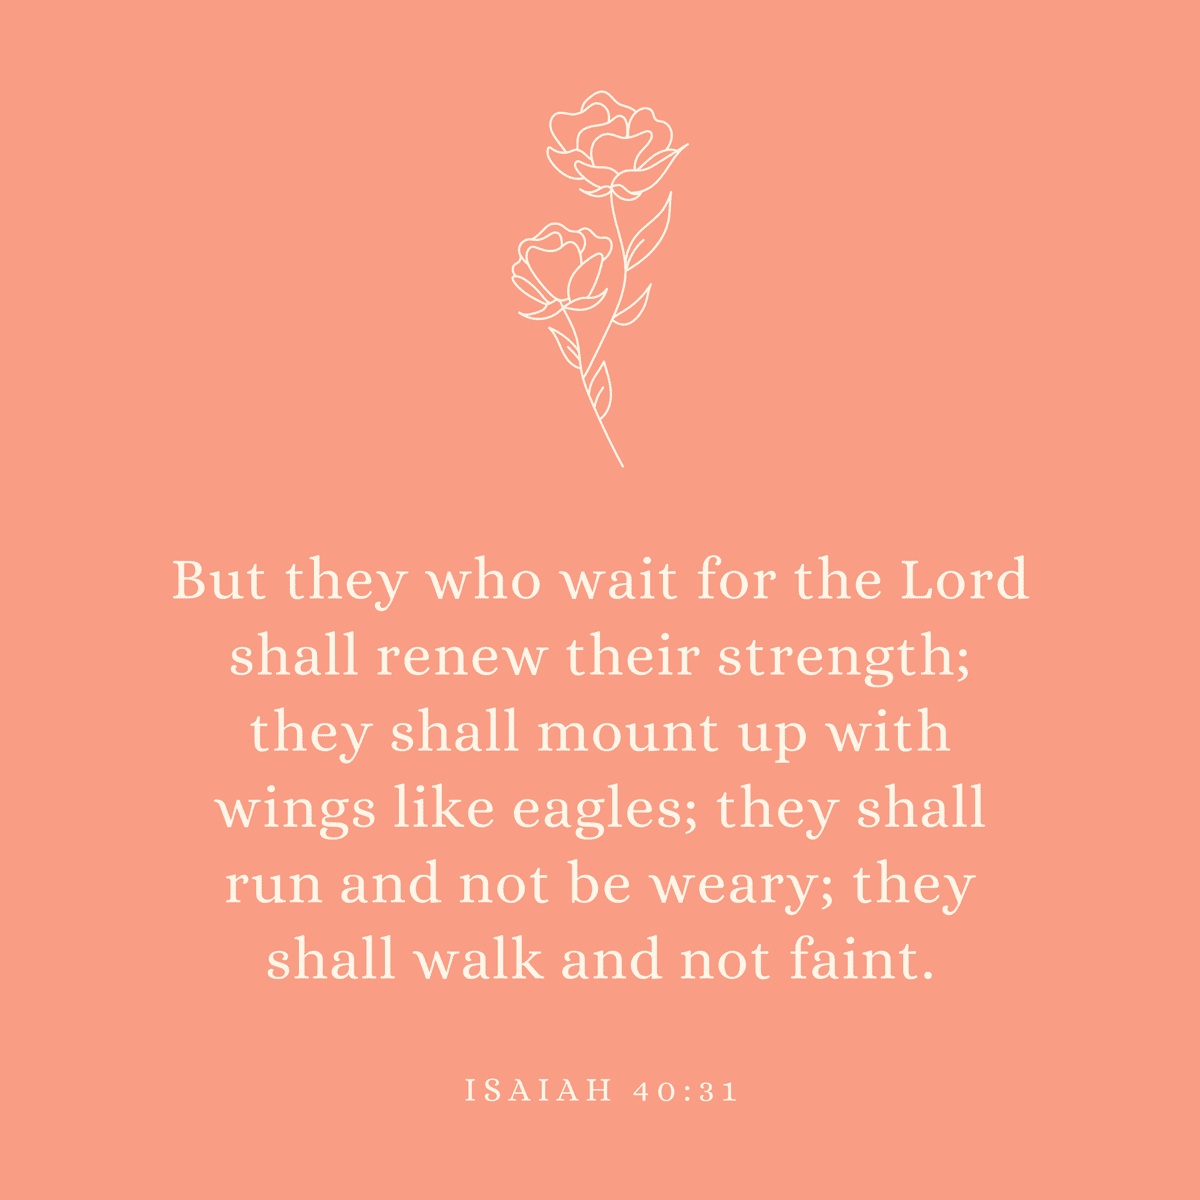 Isaiah 40:31 But they who wait for the Lord shall renew their strength; they shall mount up with wings like eagles; they shall run and not be weary; they shall walk and not faint.